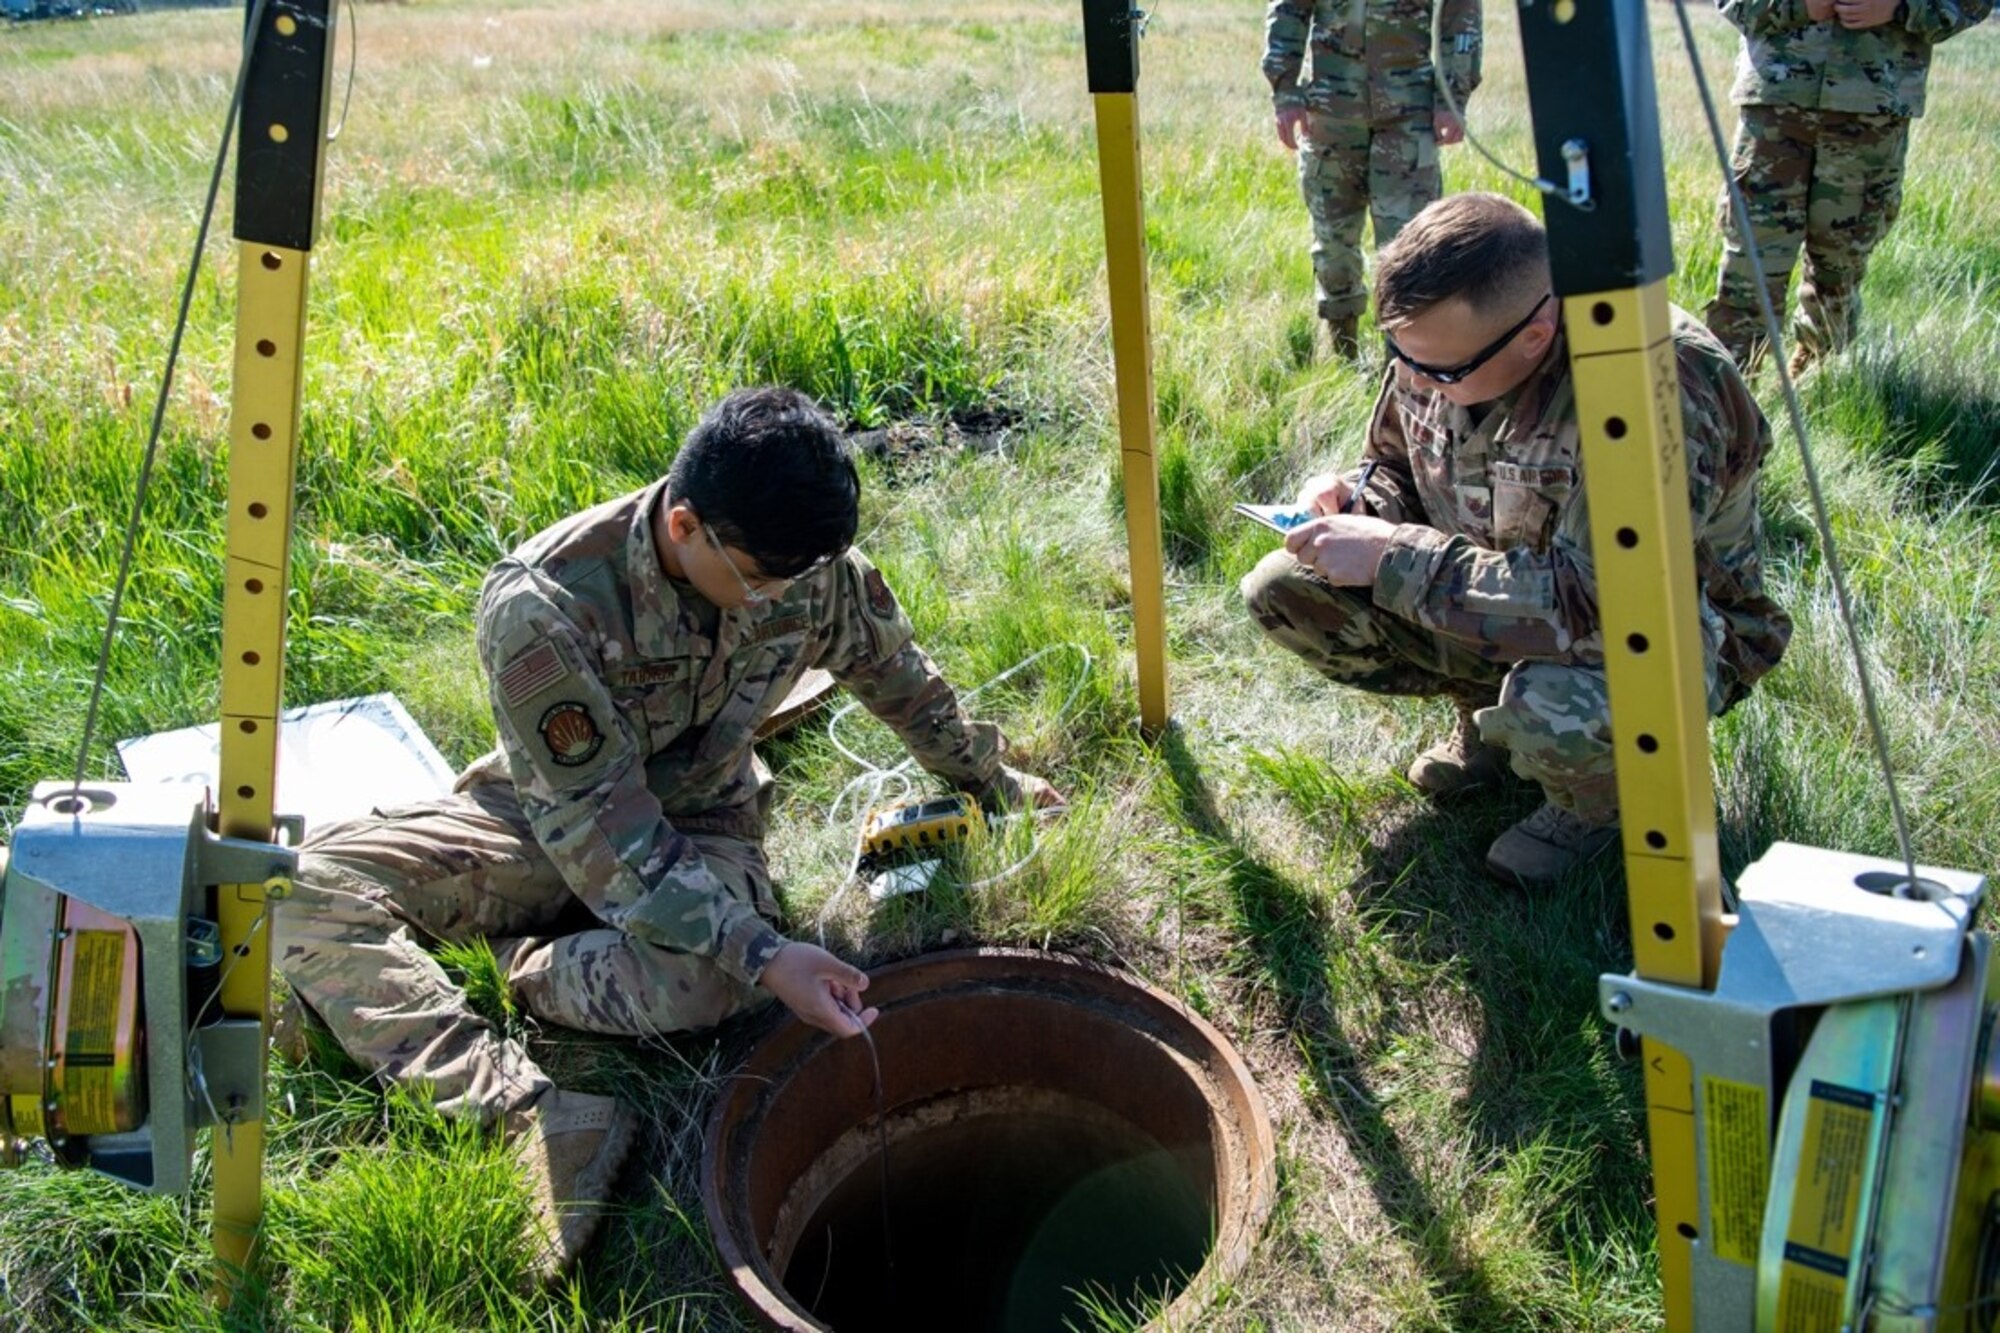 Airman 1st Class Joshua Tabasa, a heavy equipment operator assigned to the 28th Civil Engineer Squadron, tests the air within a confined space to ensure the air is breathable on Ellsworth Air Force Base, S.D., May 18, 2021